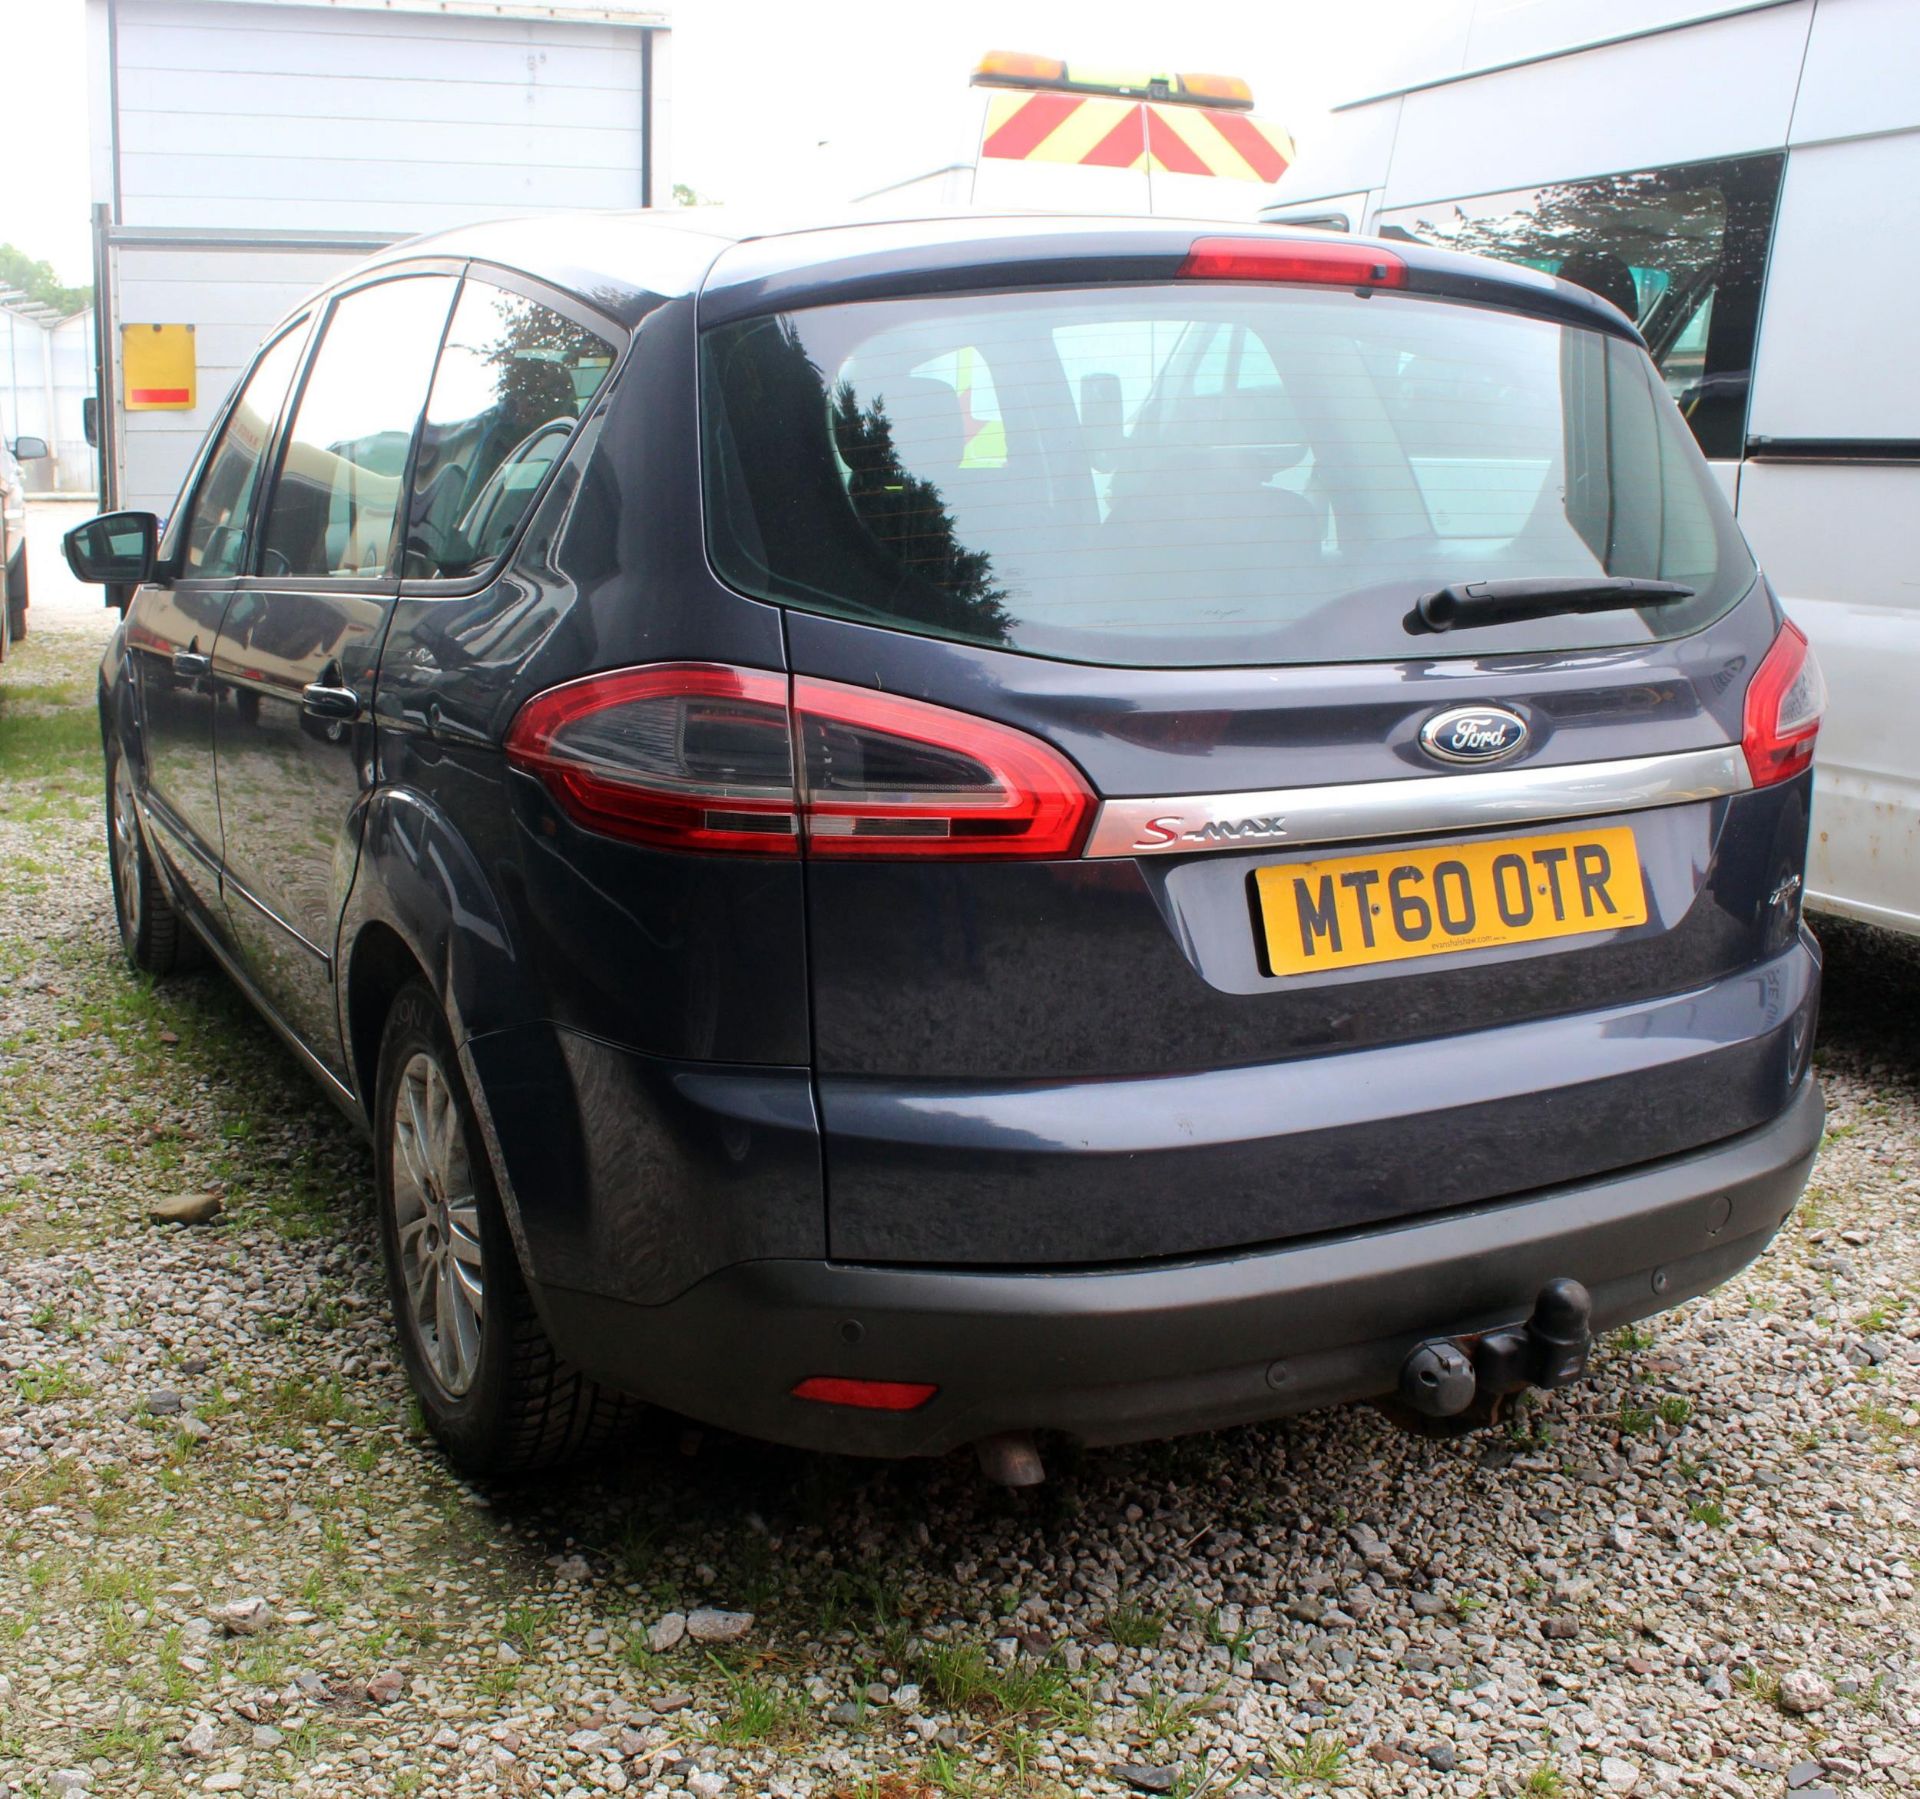 2010 FORD S MAX MT60OTR 12 MONTHS MOT 7 SEATER APPROX 145000 MILES NO VAT WHILST ALL DESCRIPTIONS - Image 3 of 3